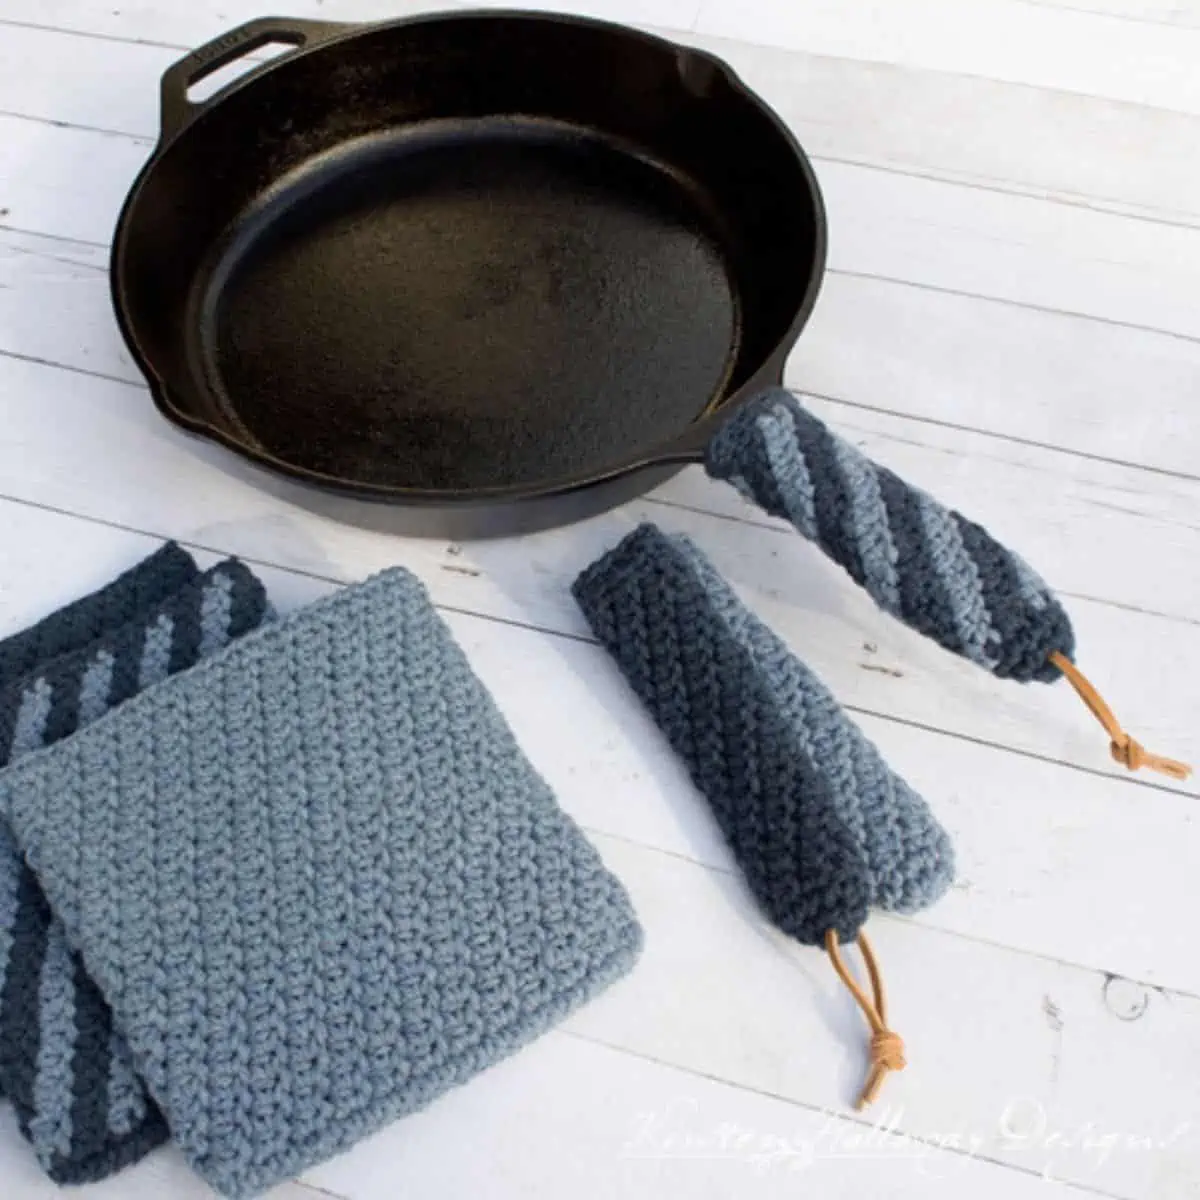 https://www.stitching-together.com/wp-content/uploads/2022/02/crochet-cast-iron-handle-cover.webp